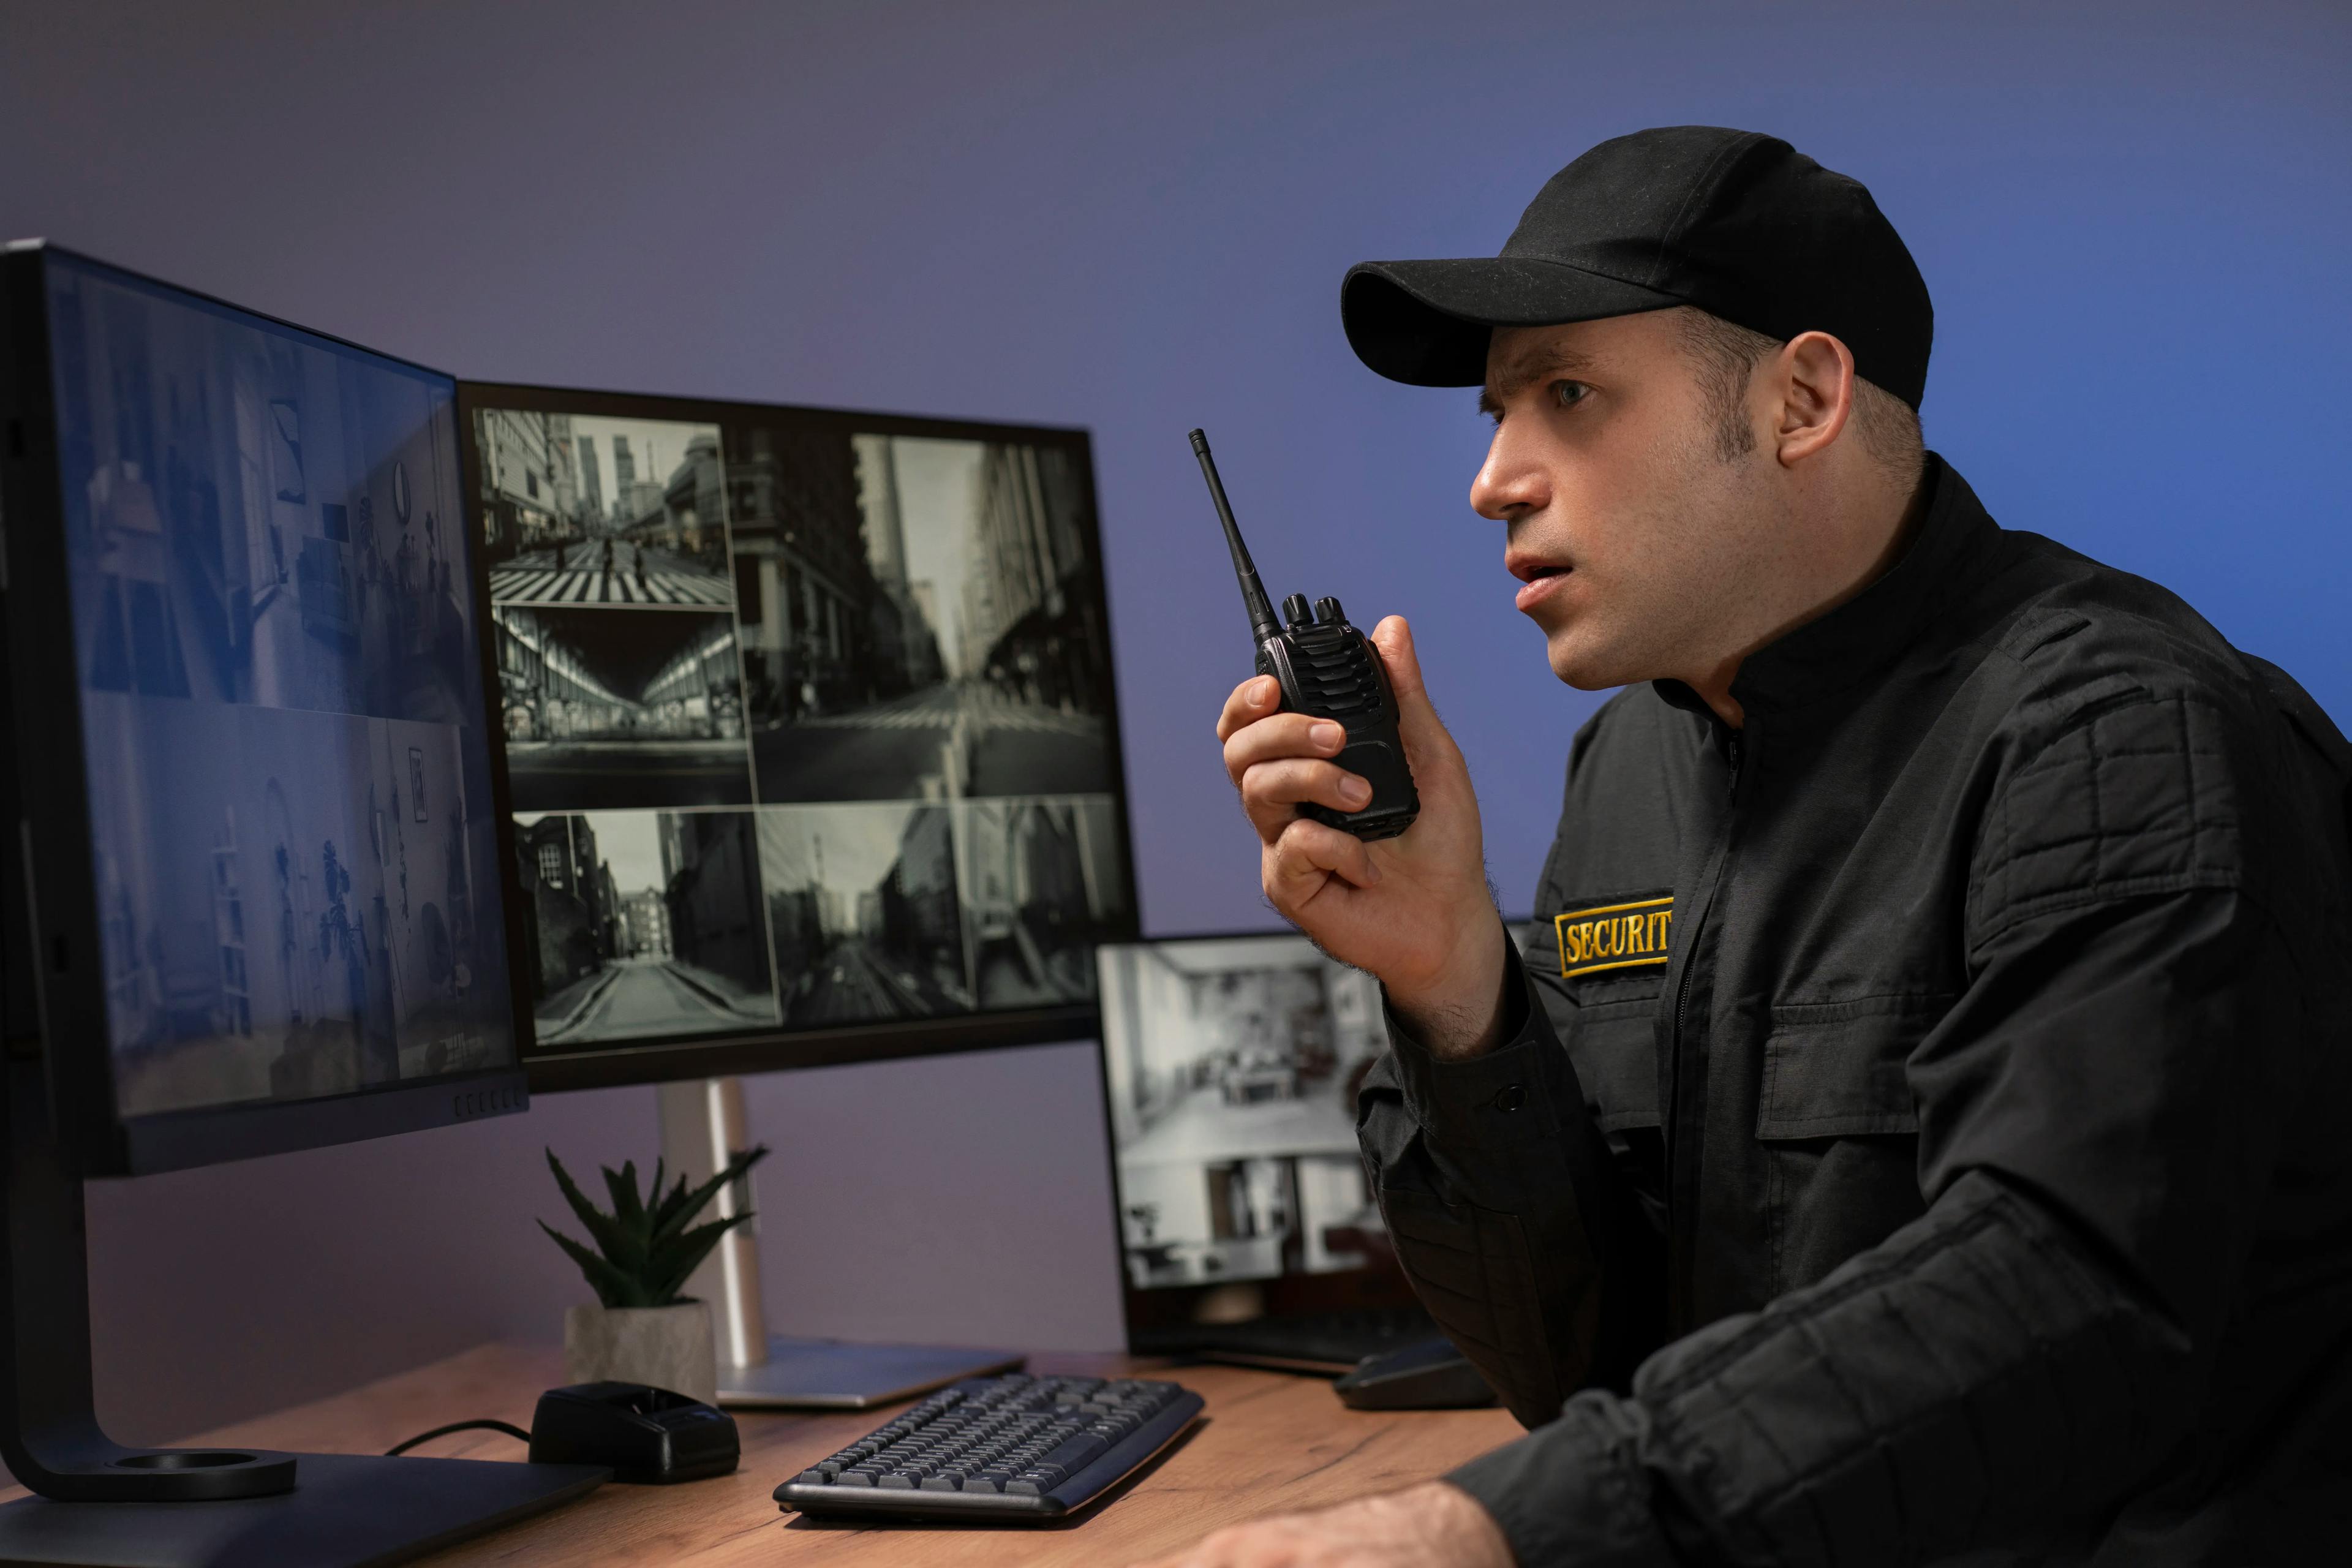 Portrait of male security guard with radio station and camera screens